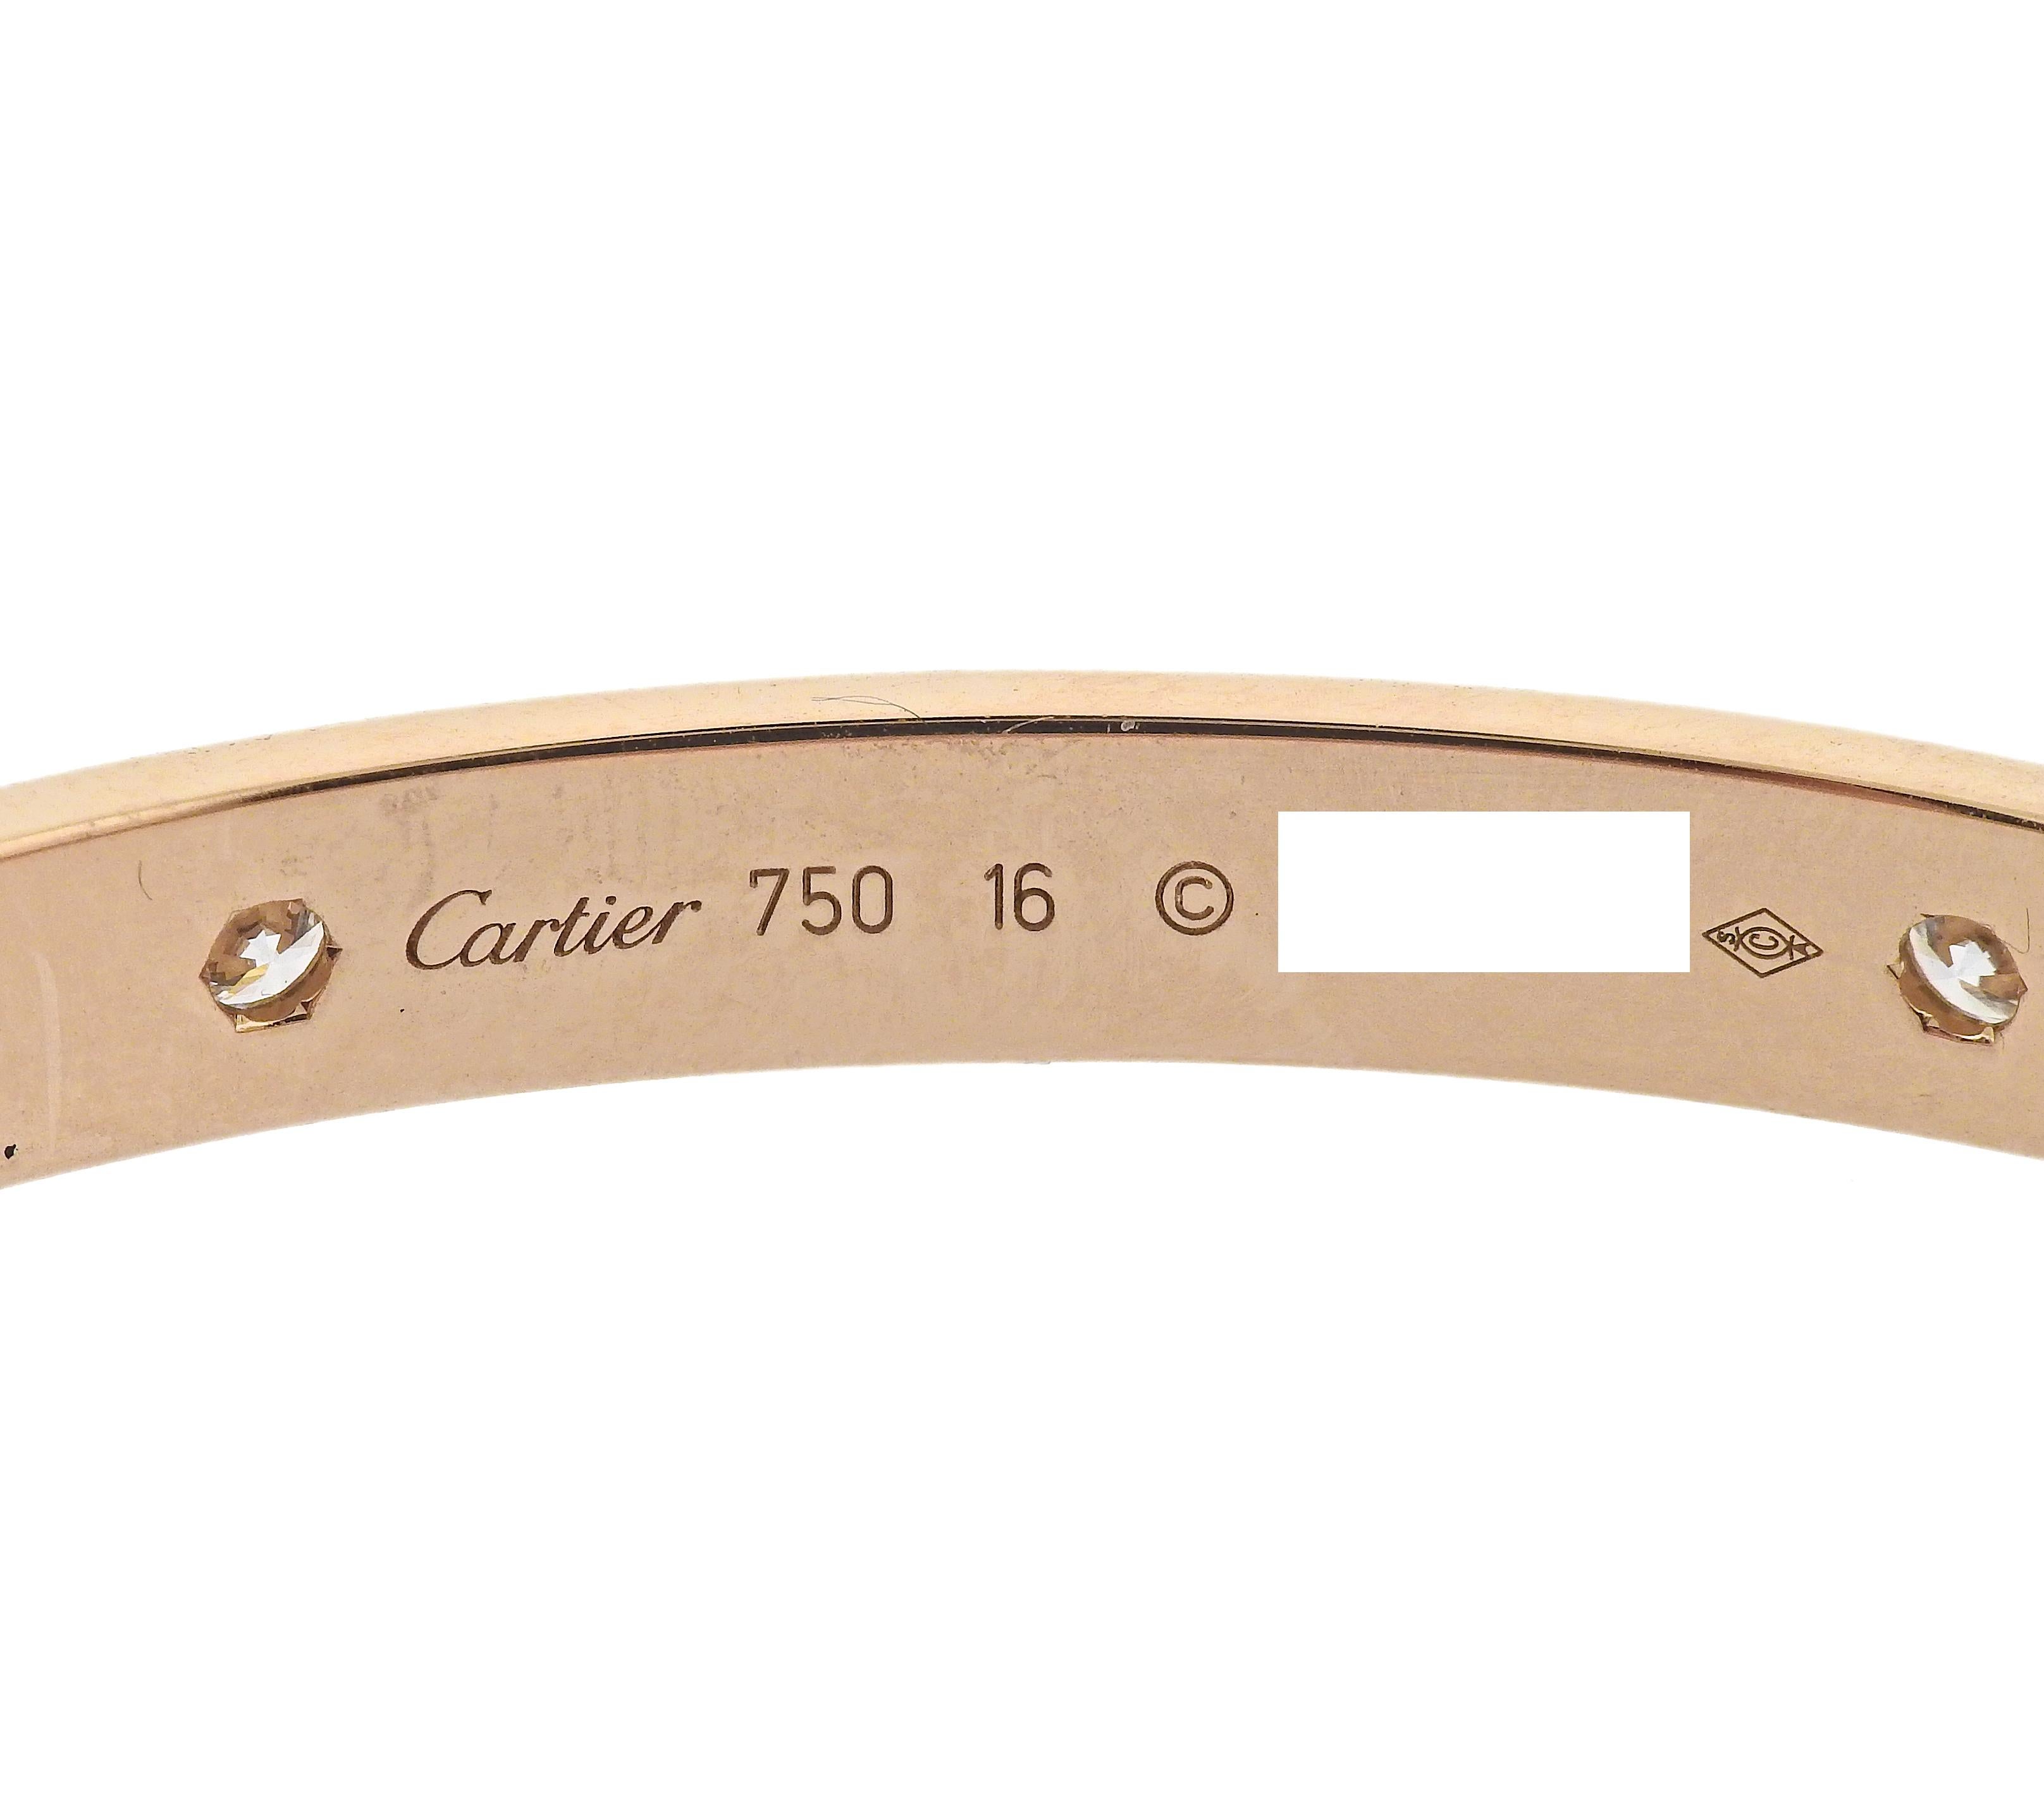 18k rose gold iconic Love bangle bracelet by Cartier, in size 16, with 0.42ctw G/VS diamonds . Comes with box and screwdriver. Retail $11000. Bracelet is Cartier size 16, width 6mm. Marked Cartier, 750, XA7***, 16. Weight 28.7 grams.